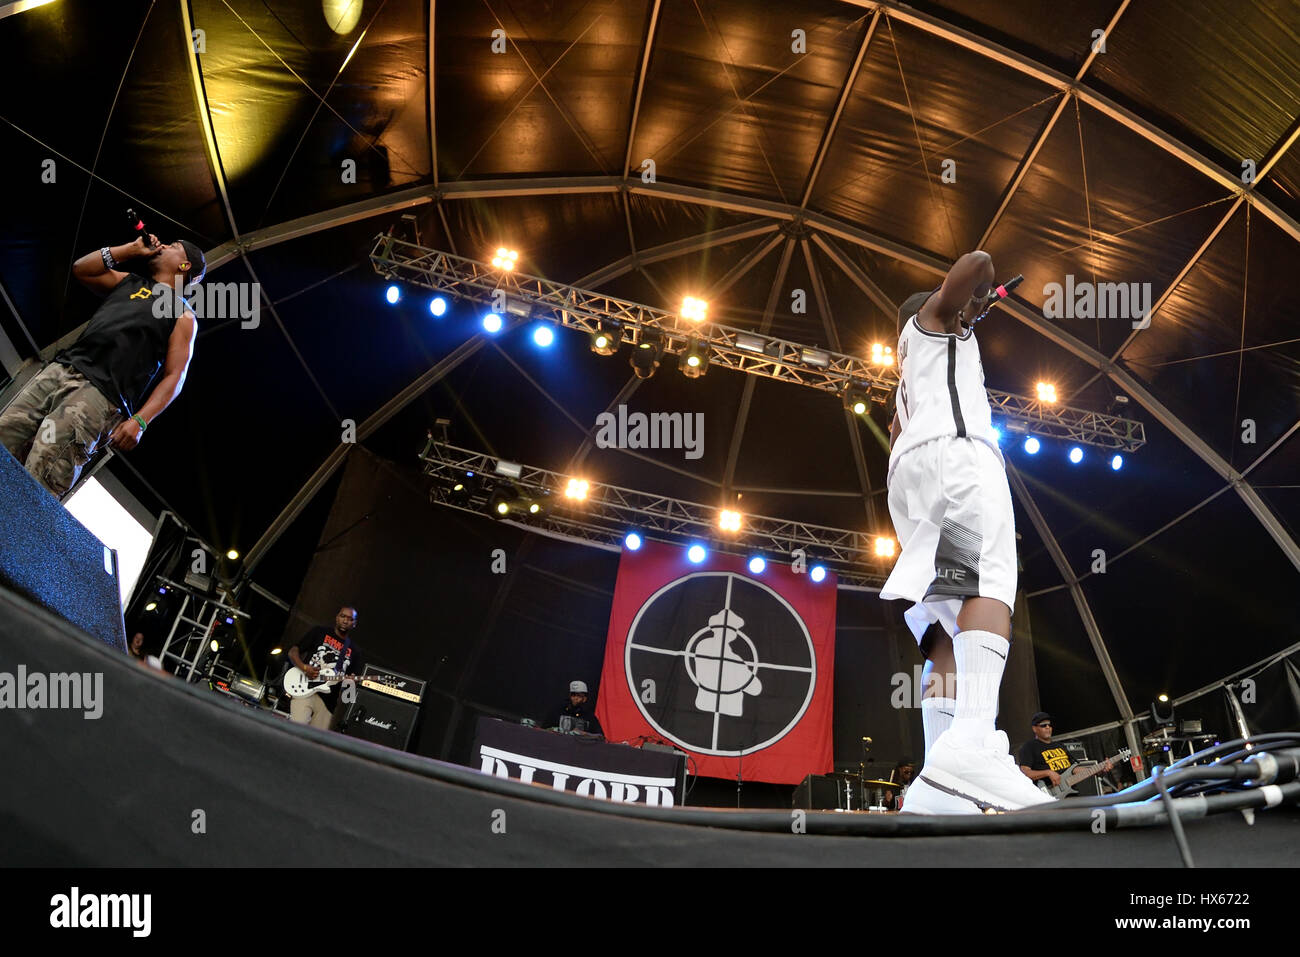 BENICASSIM, SPAIN - JUL 19: Public Enemy (hip hop group) in concert at FIB Festival on July 19, 2015 in Benicassim, Spain. Stock Photo